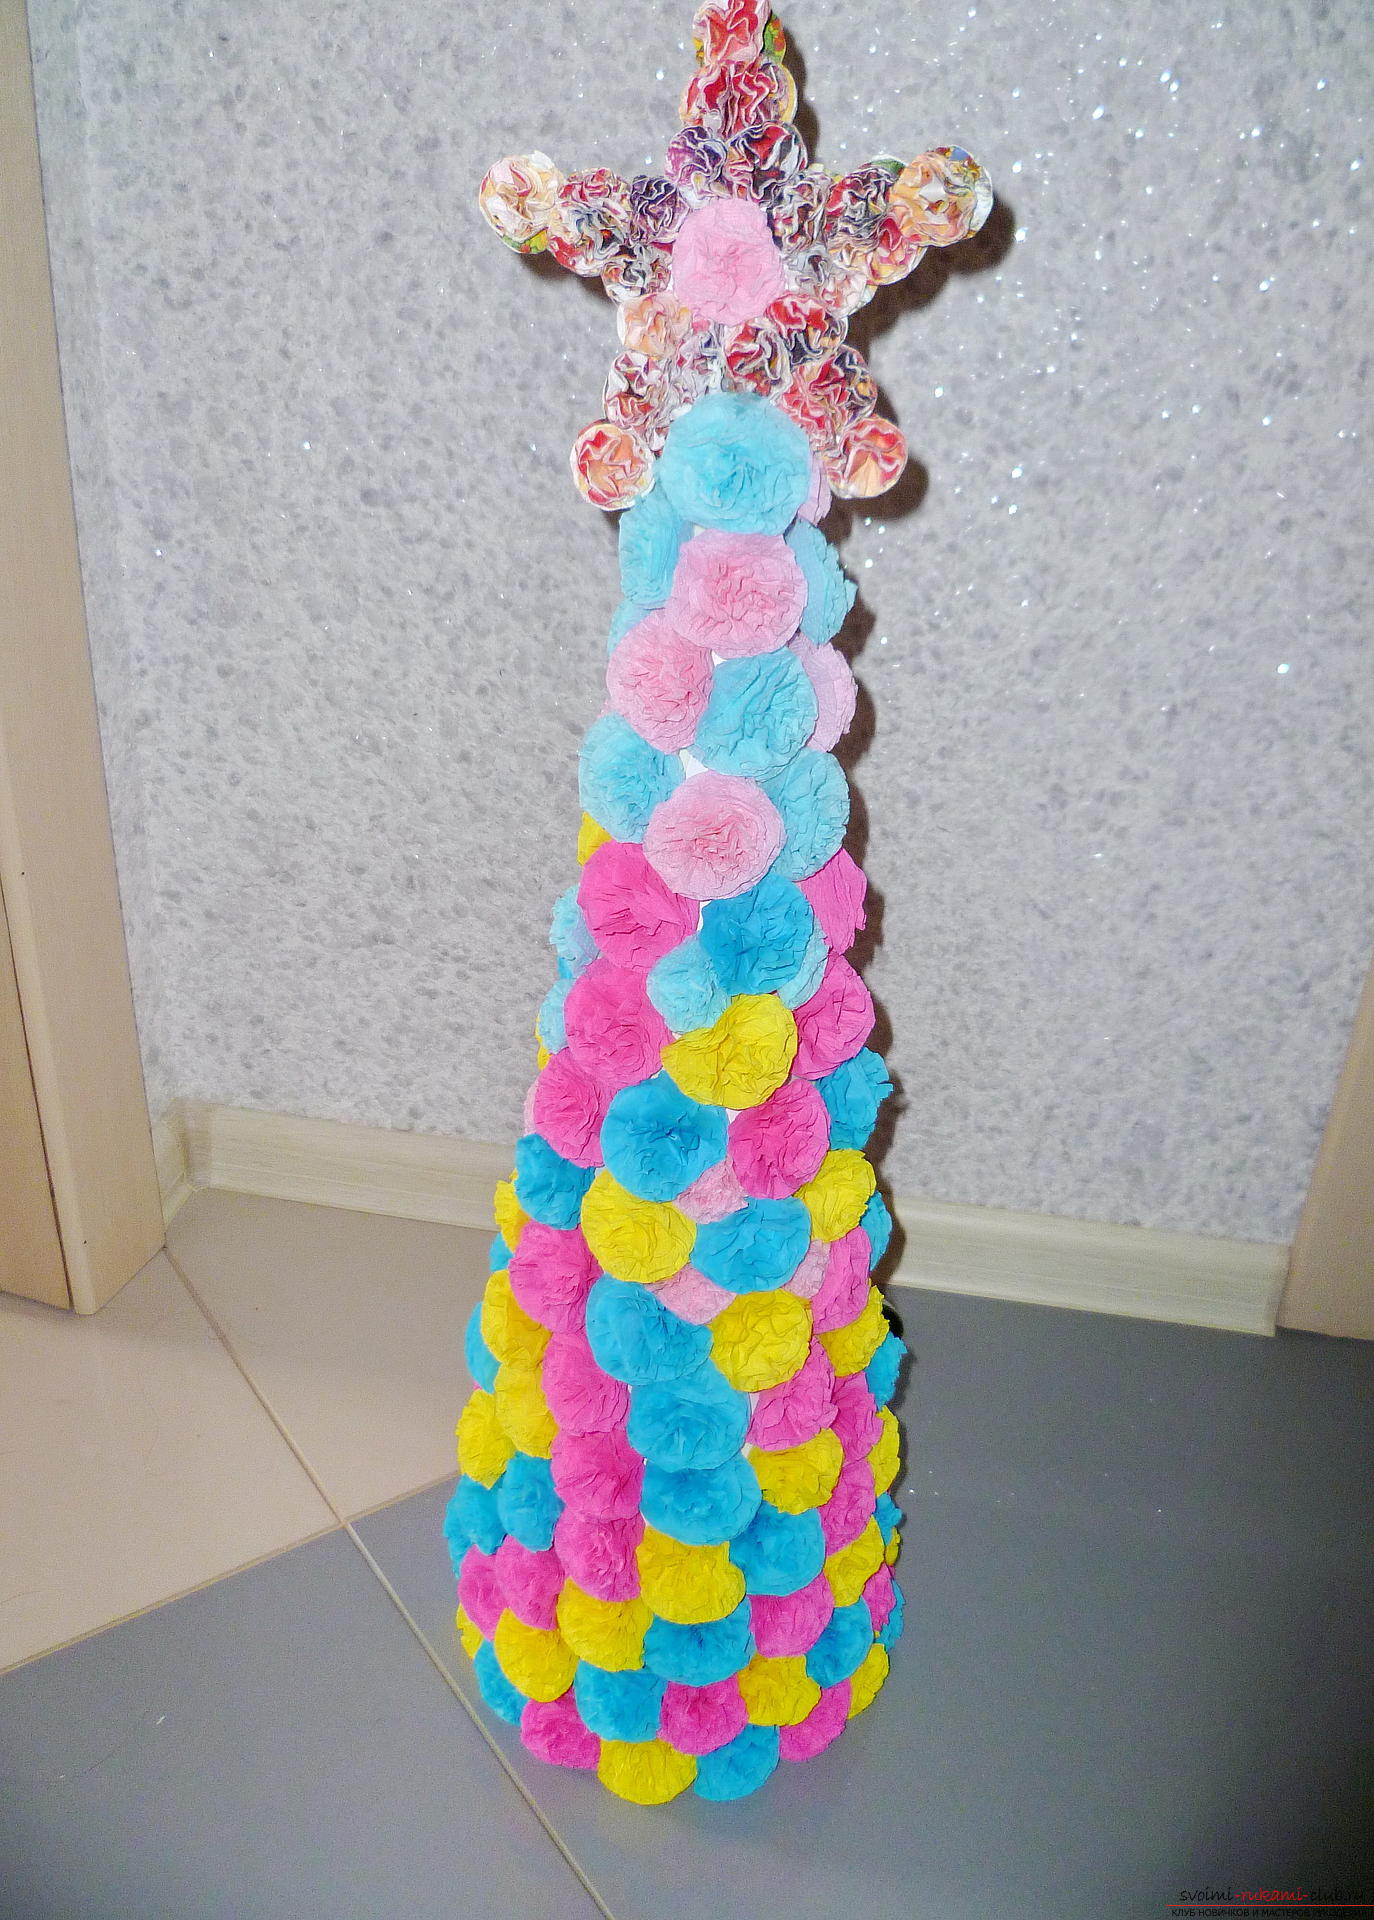 We did amazing New Year's work with children in kindergarten. The most beautiful crafts for the New Year is our Christmas tree made of corrugated paper .. Photo # 1